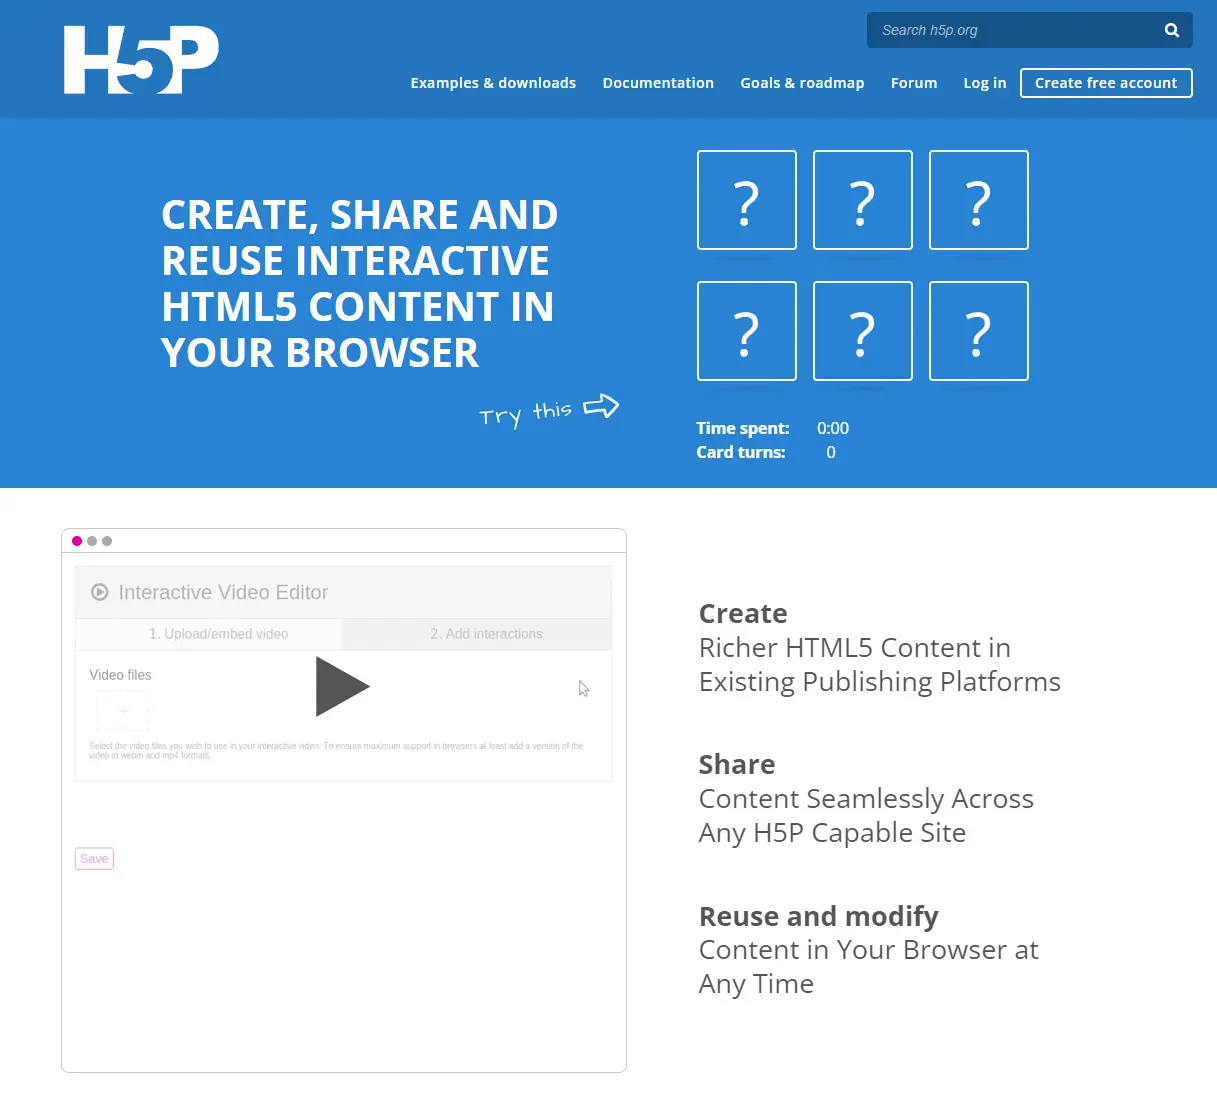 A screenshot of the homepage of H5P showing some interactive authoring tools.